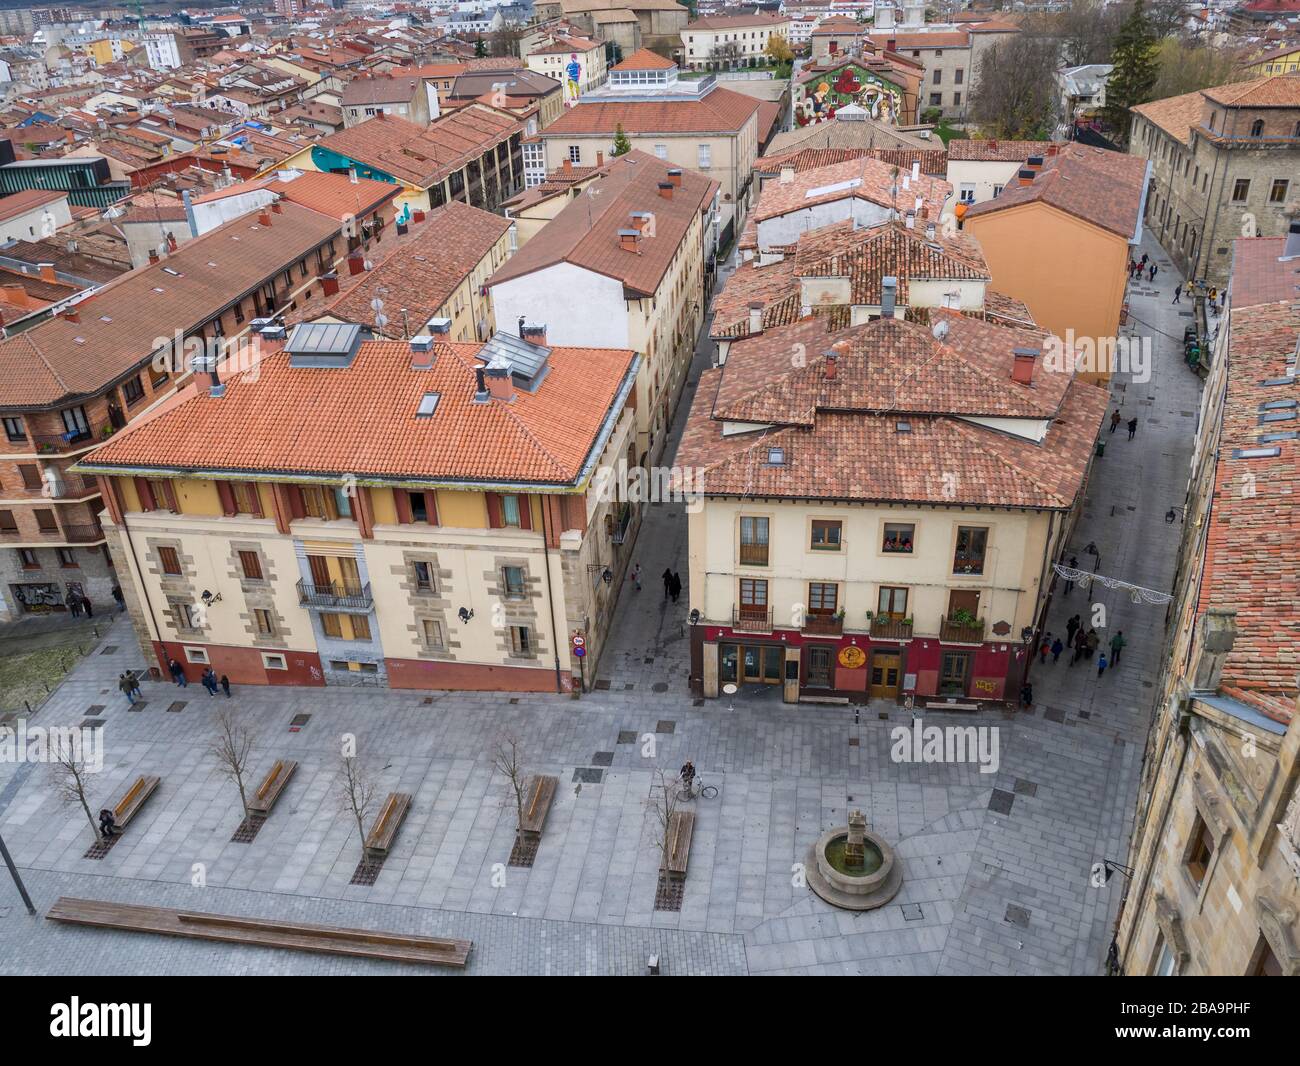 Aerial view over Plaza Santa Maria Square and the Old Town, as seen from the tower of the old cathedral, Vitoria-Gasteiz, Basque Country, Spain Stock Photo